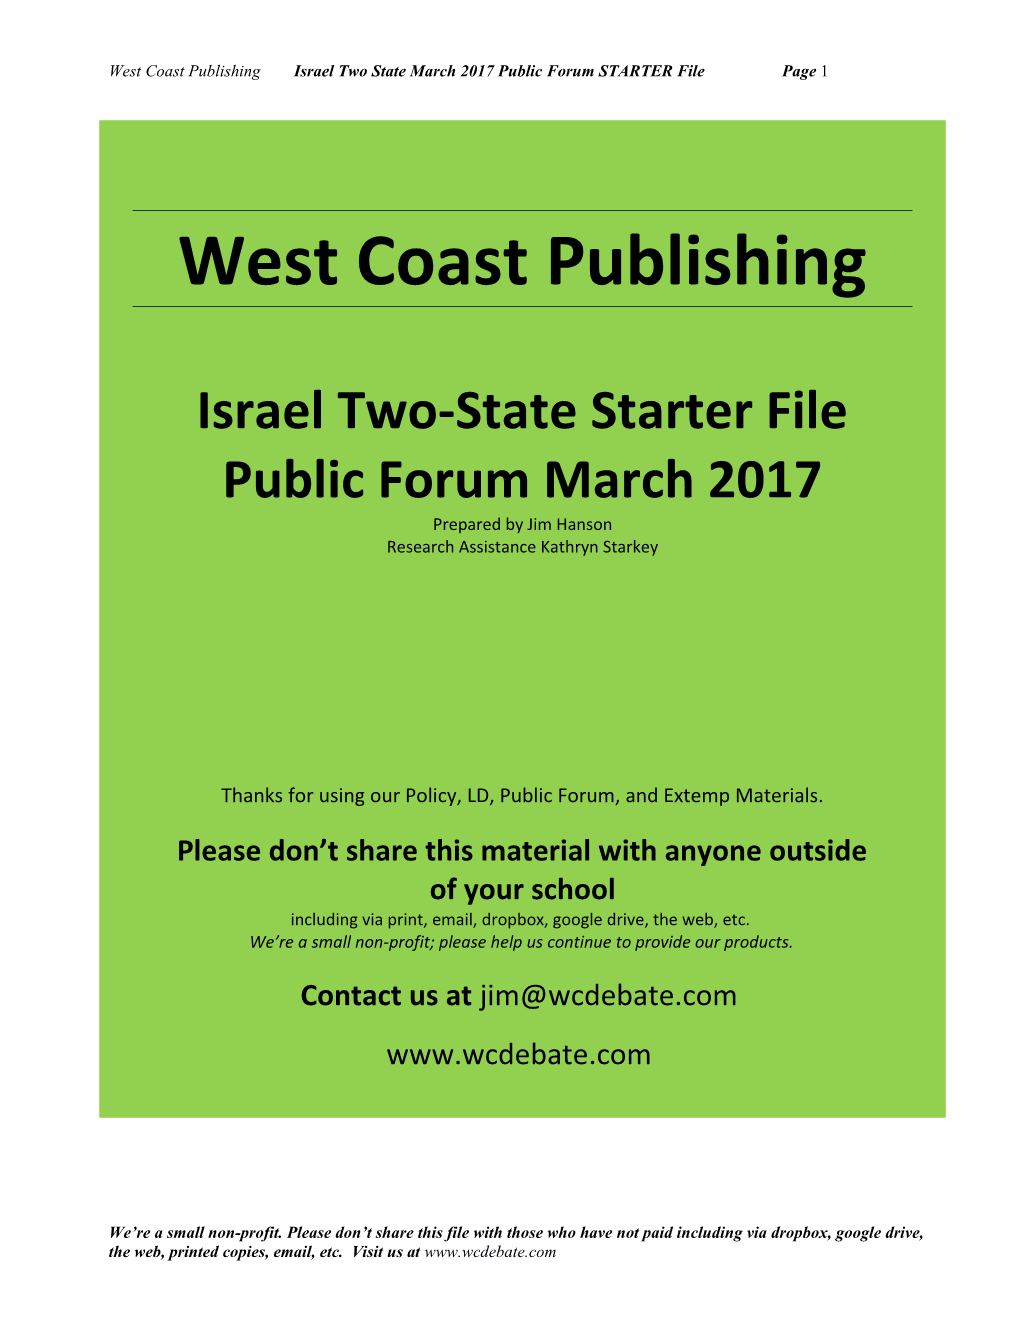 Israel Two State Starter File